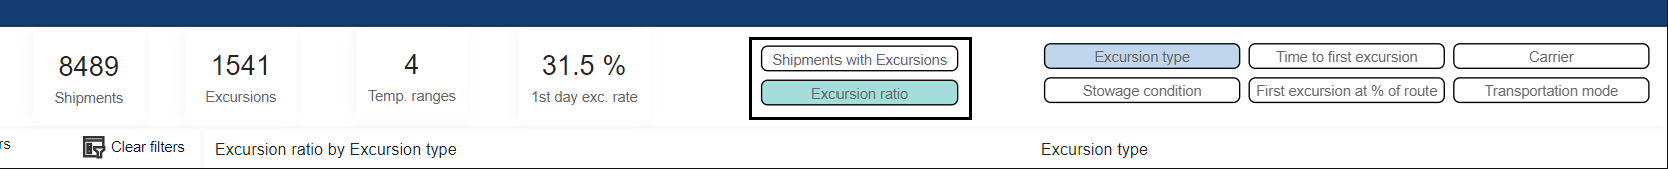 Screenshot showing how you can switch between graphs showing number of shipments with excursions or ratio of shipments with excursions as a percentage of all shipments